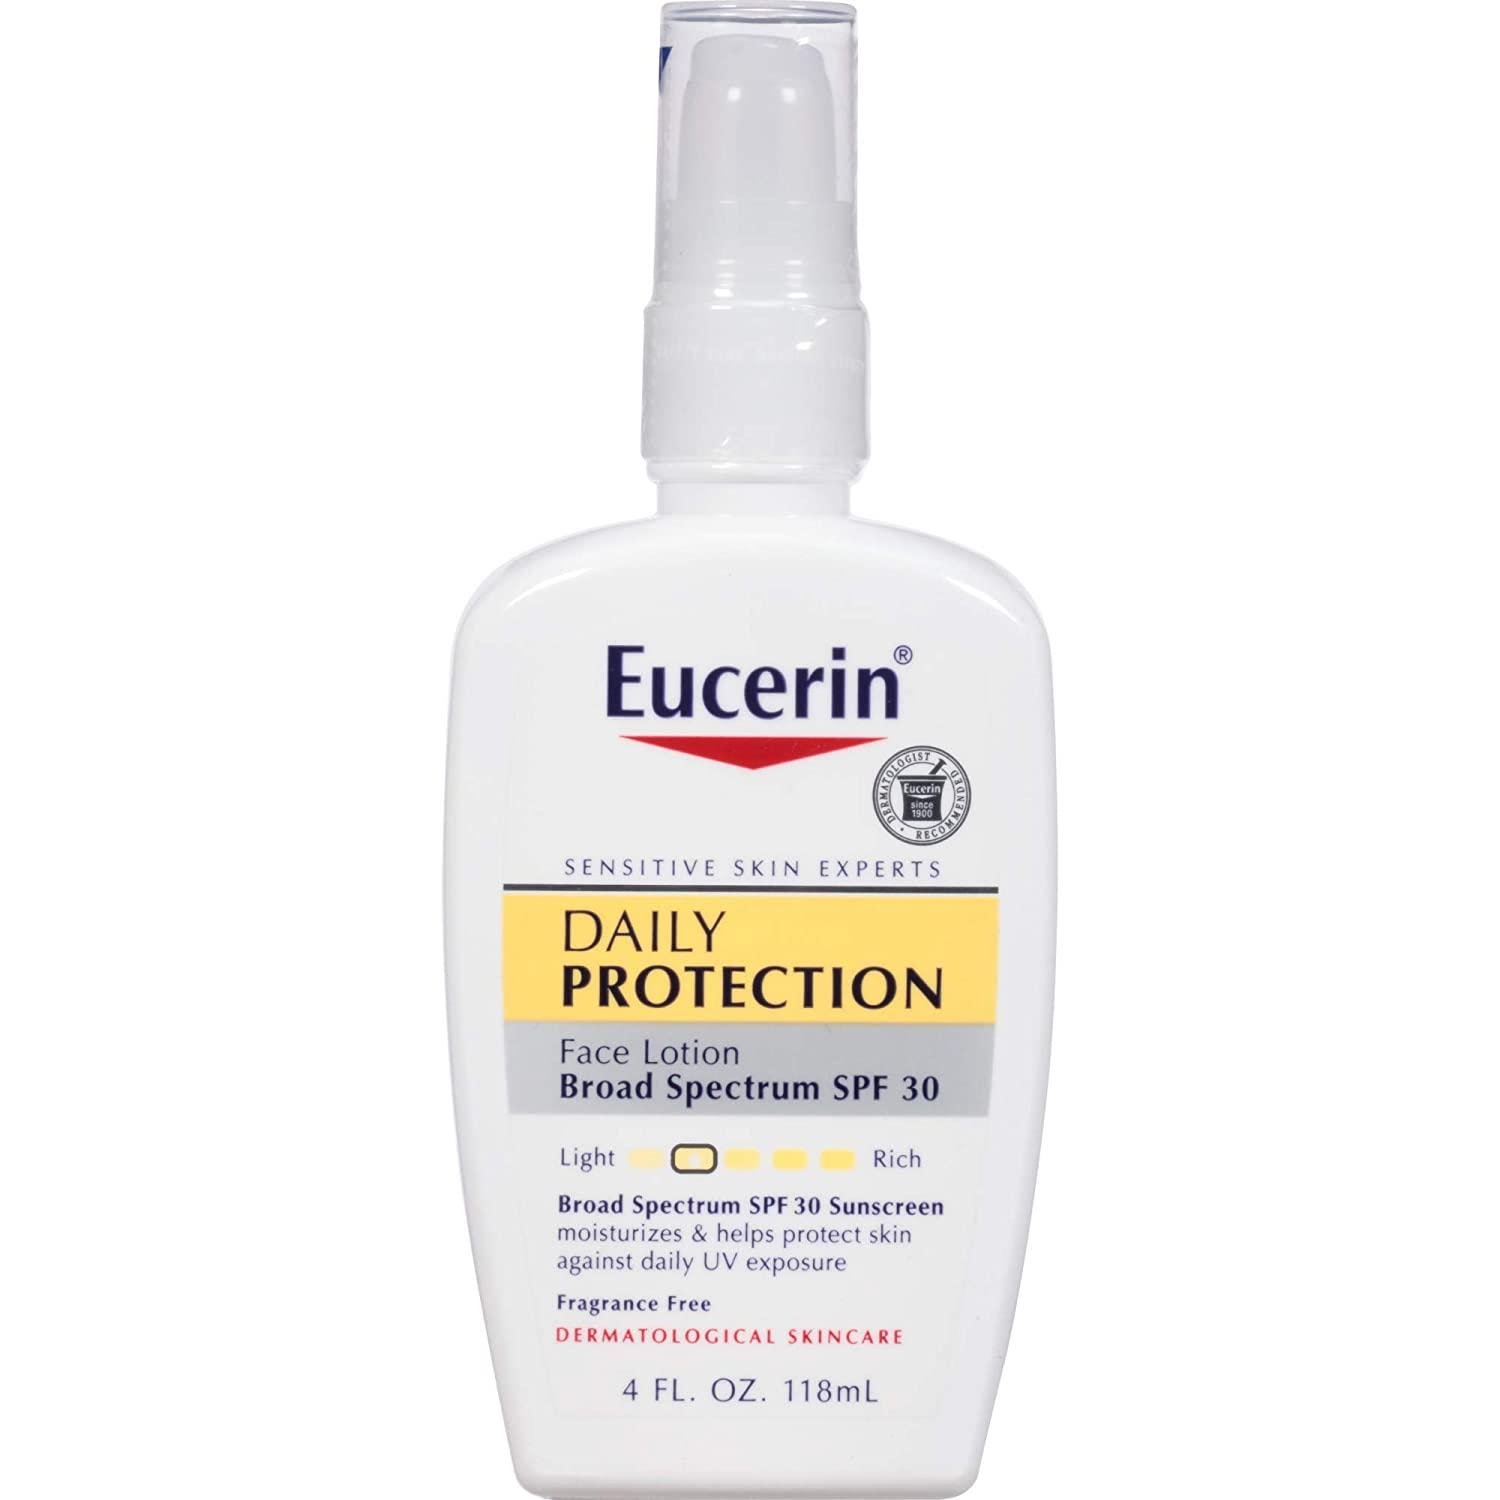 Eucerin Daily Protection Face Lotion for $4.45